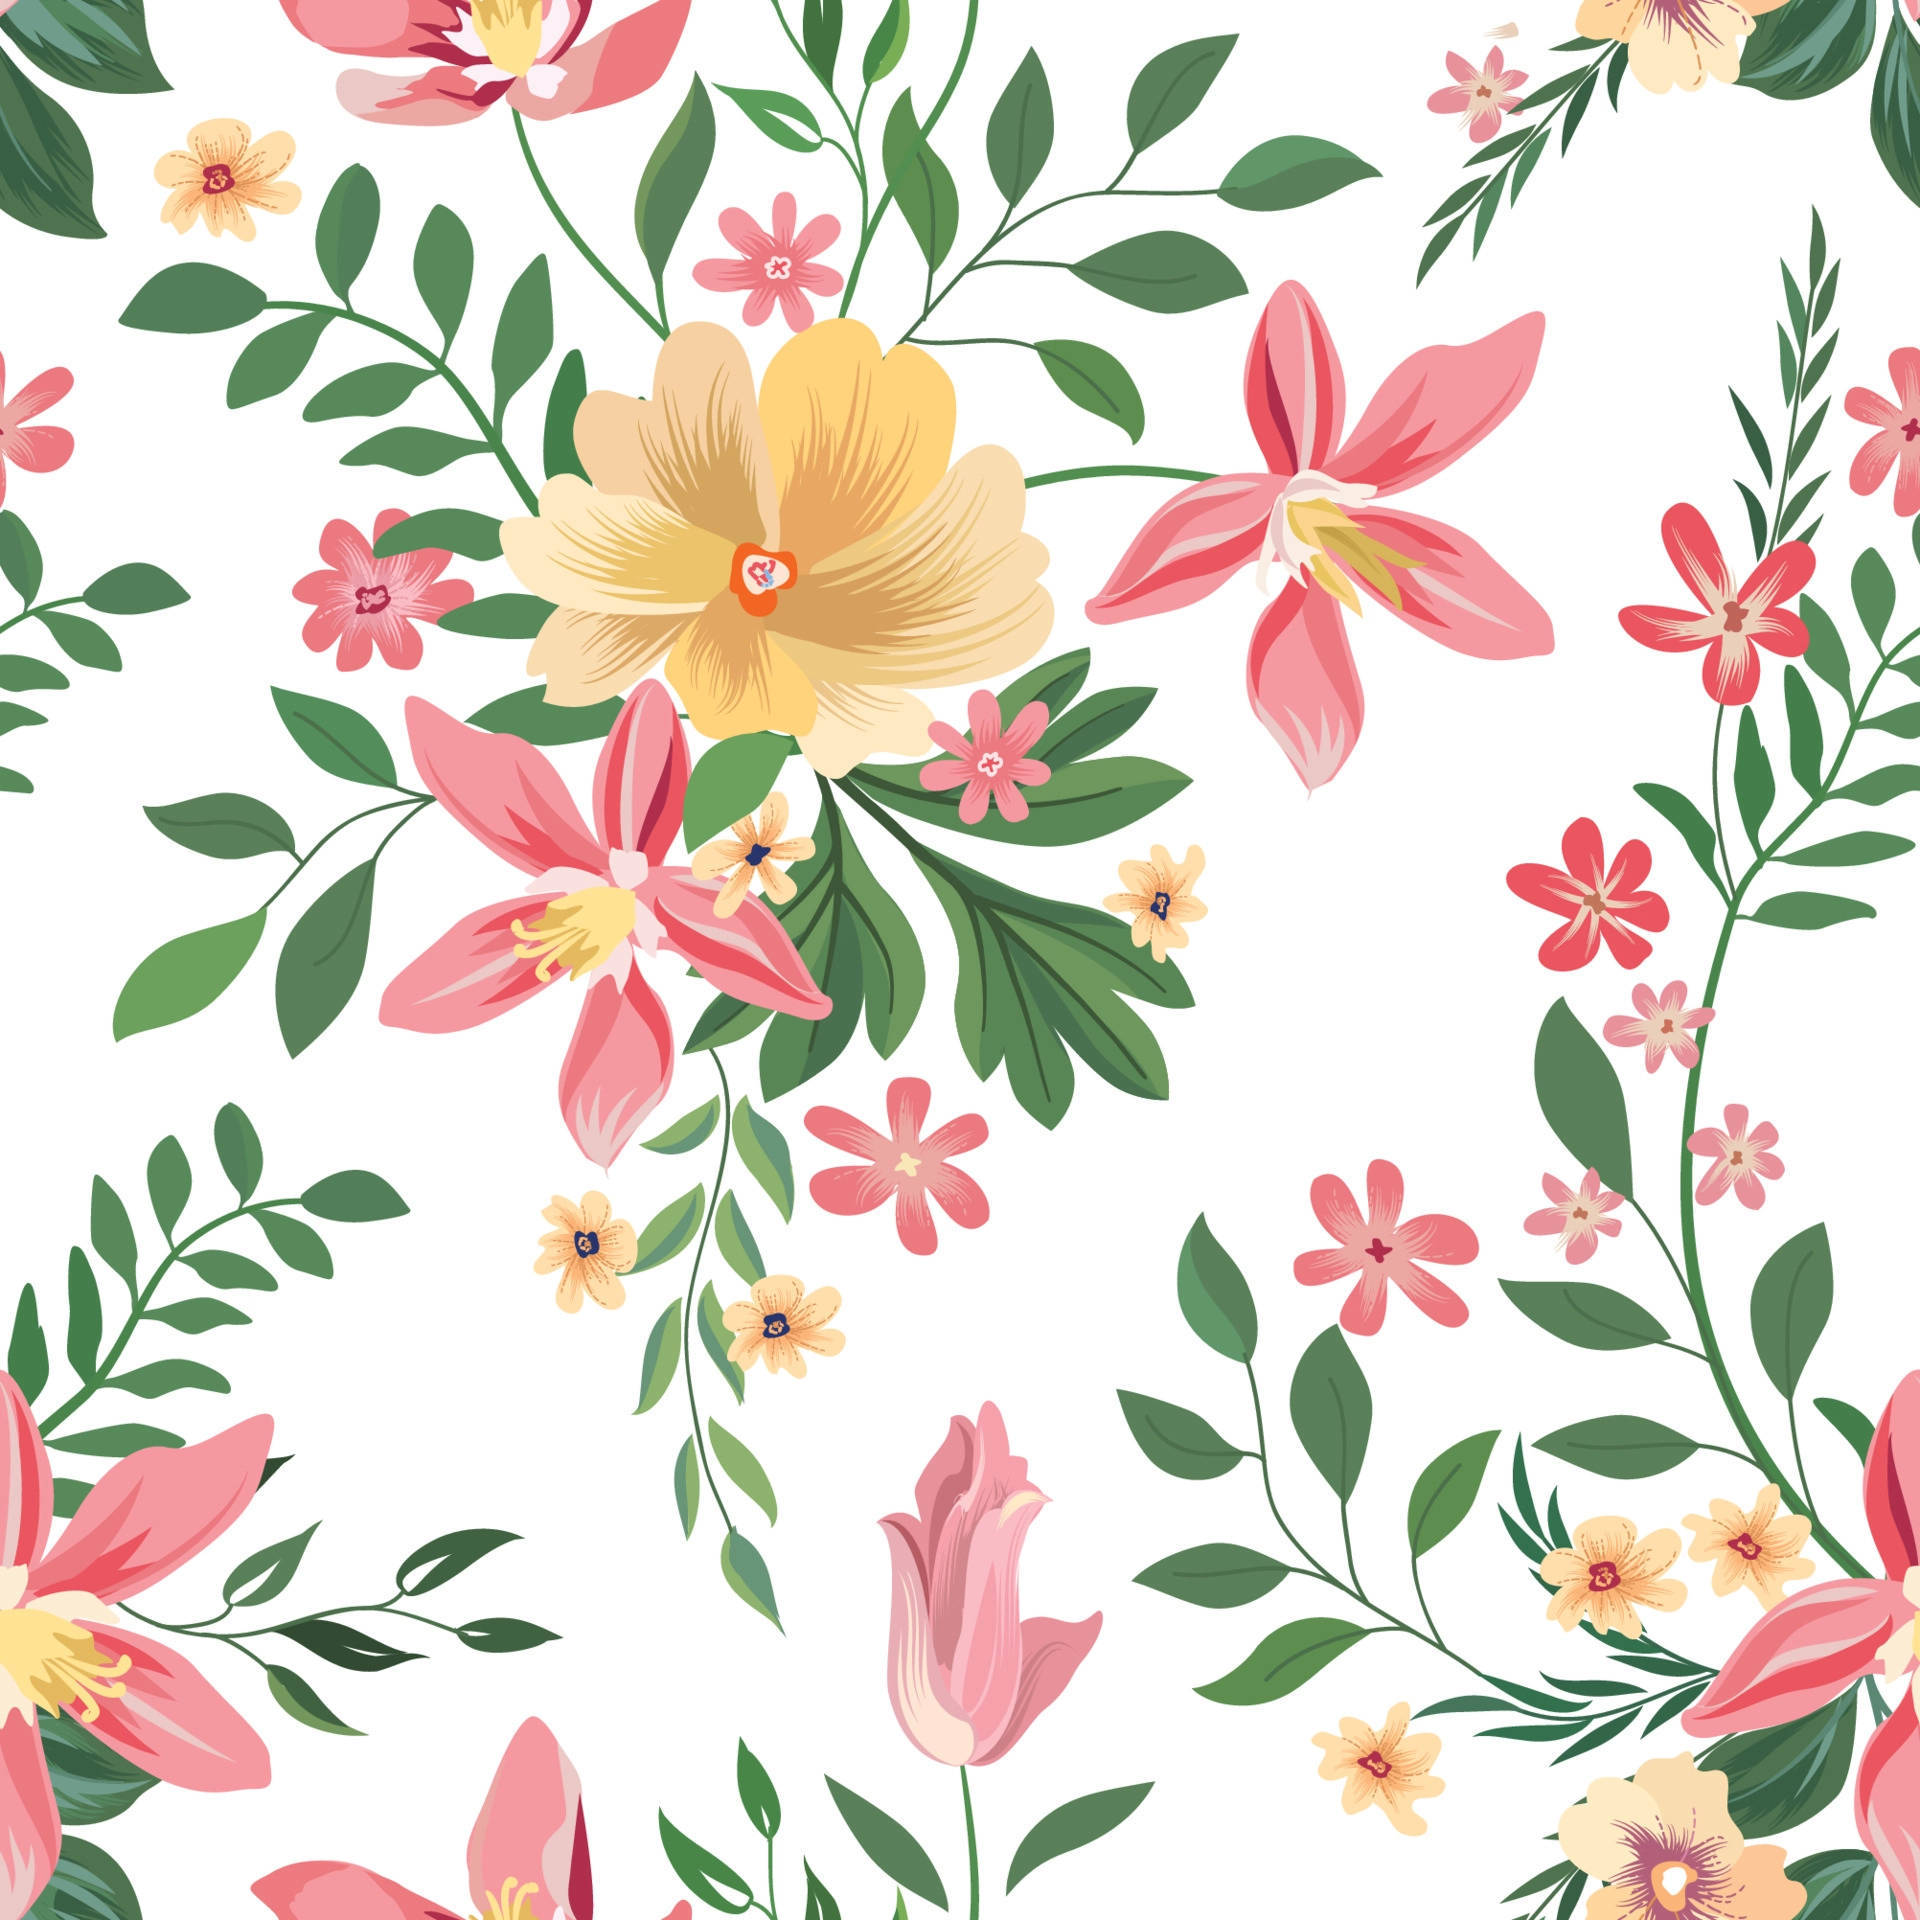 Illustrated Flowers Background Wallpaper